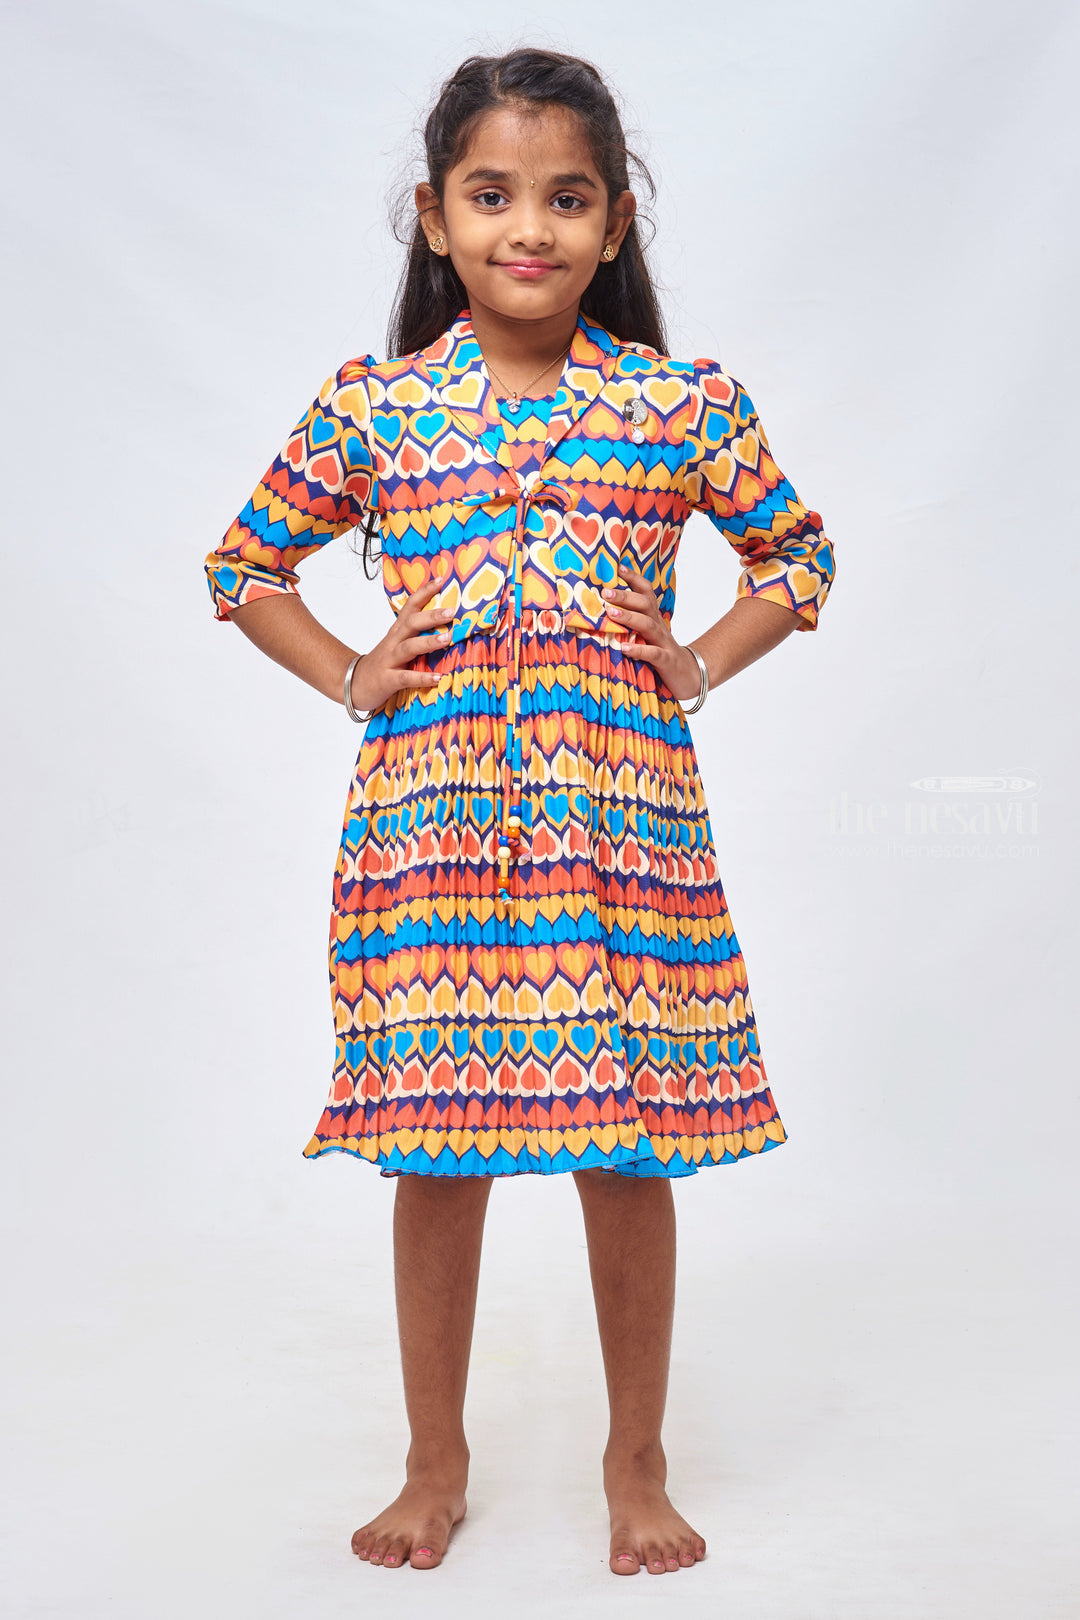 The Nesavu Girls Fancy Frock Yellow Heart Delight: Online Frock Pleated Fancy Frock with Collared Overcoat for Girls Nesavu 20 (3Y) / Yellow / Georgette GFC1159A-20 Daily Wear Cotton Frocks for Children | Chic Cotton Frock Designs for Girls | The Nesavu